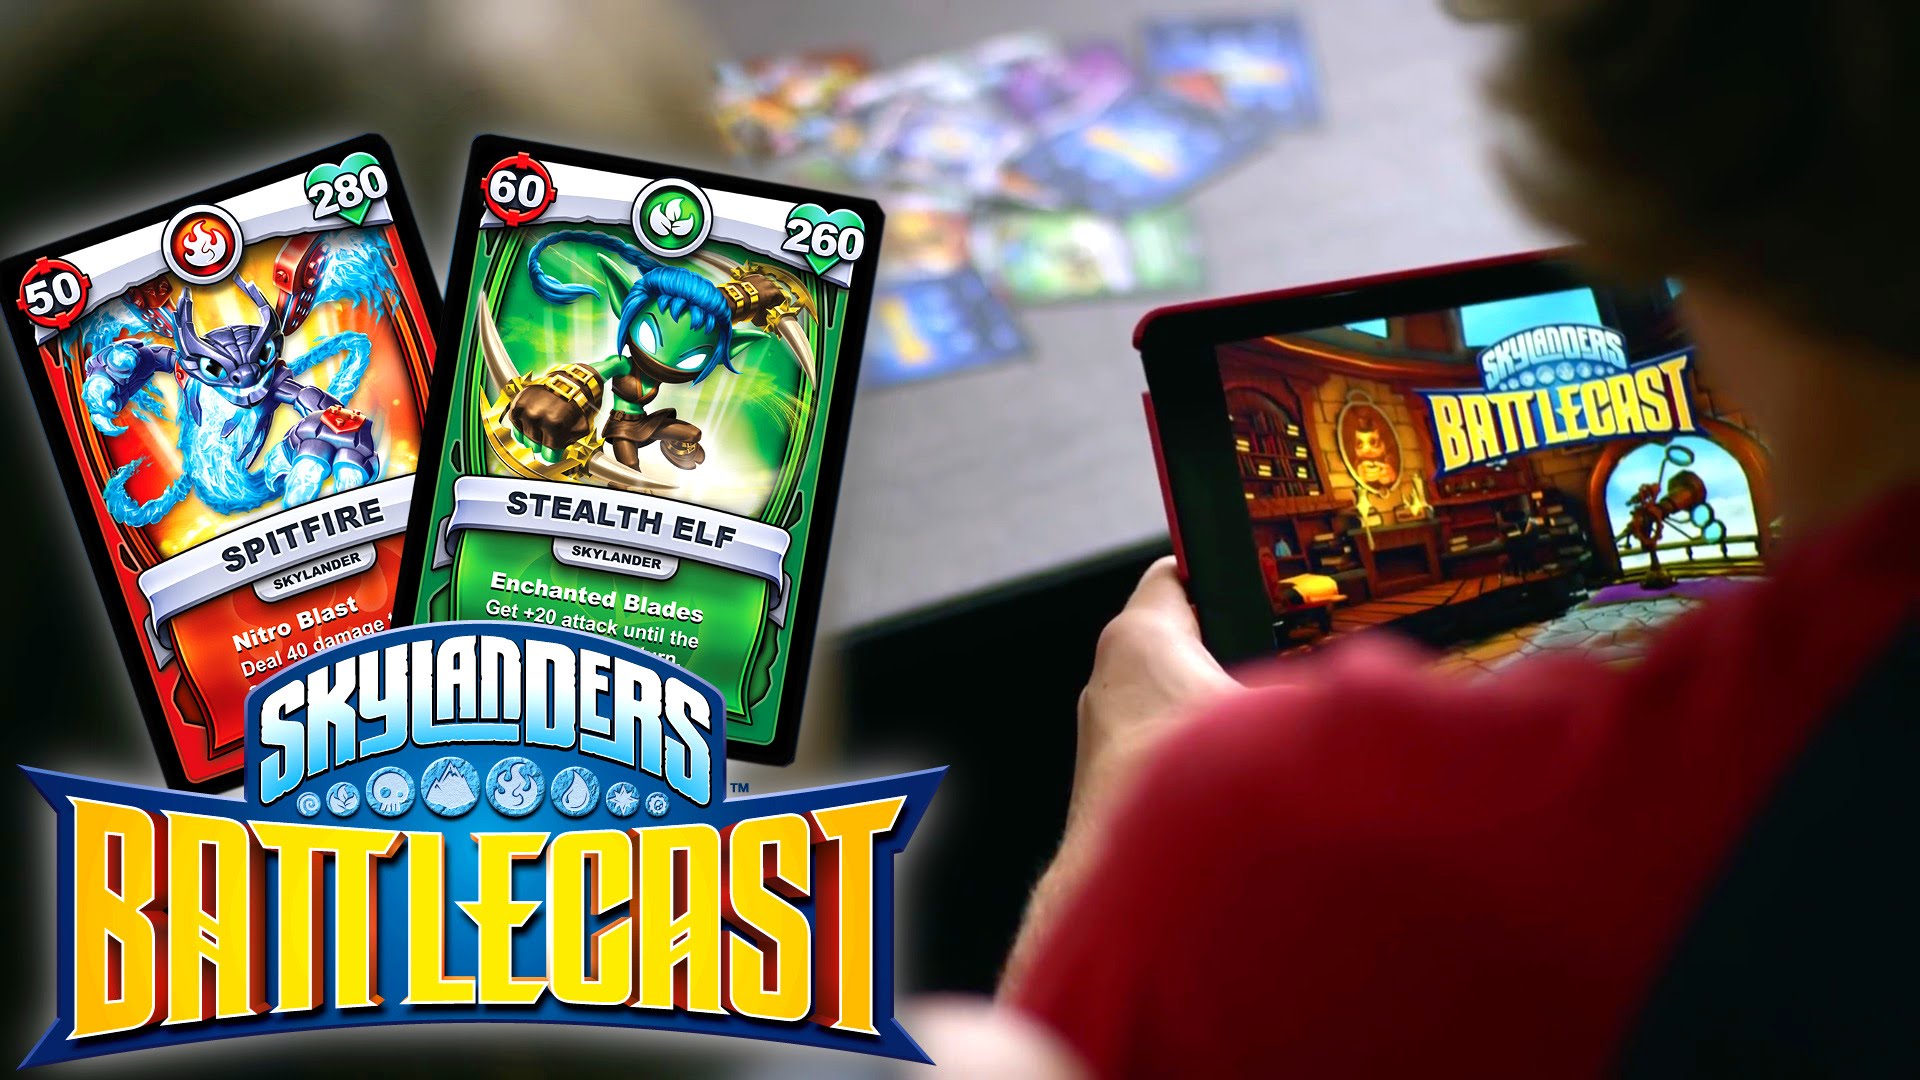 Skylanders Battlecast – Cost and Game-Play Analysis